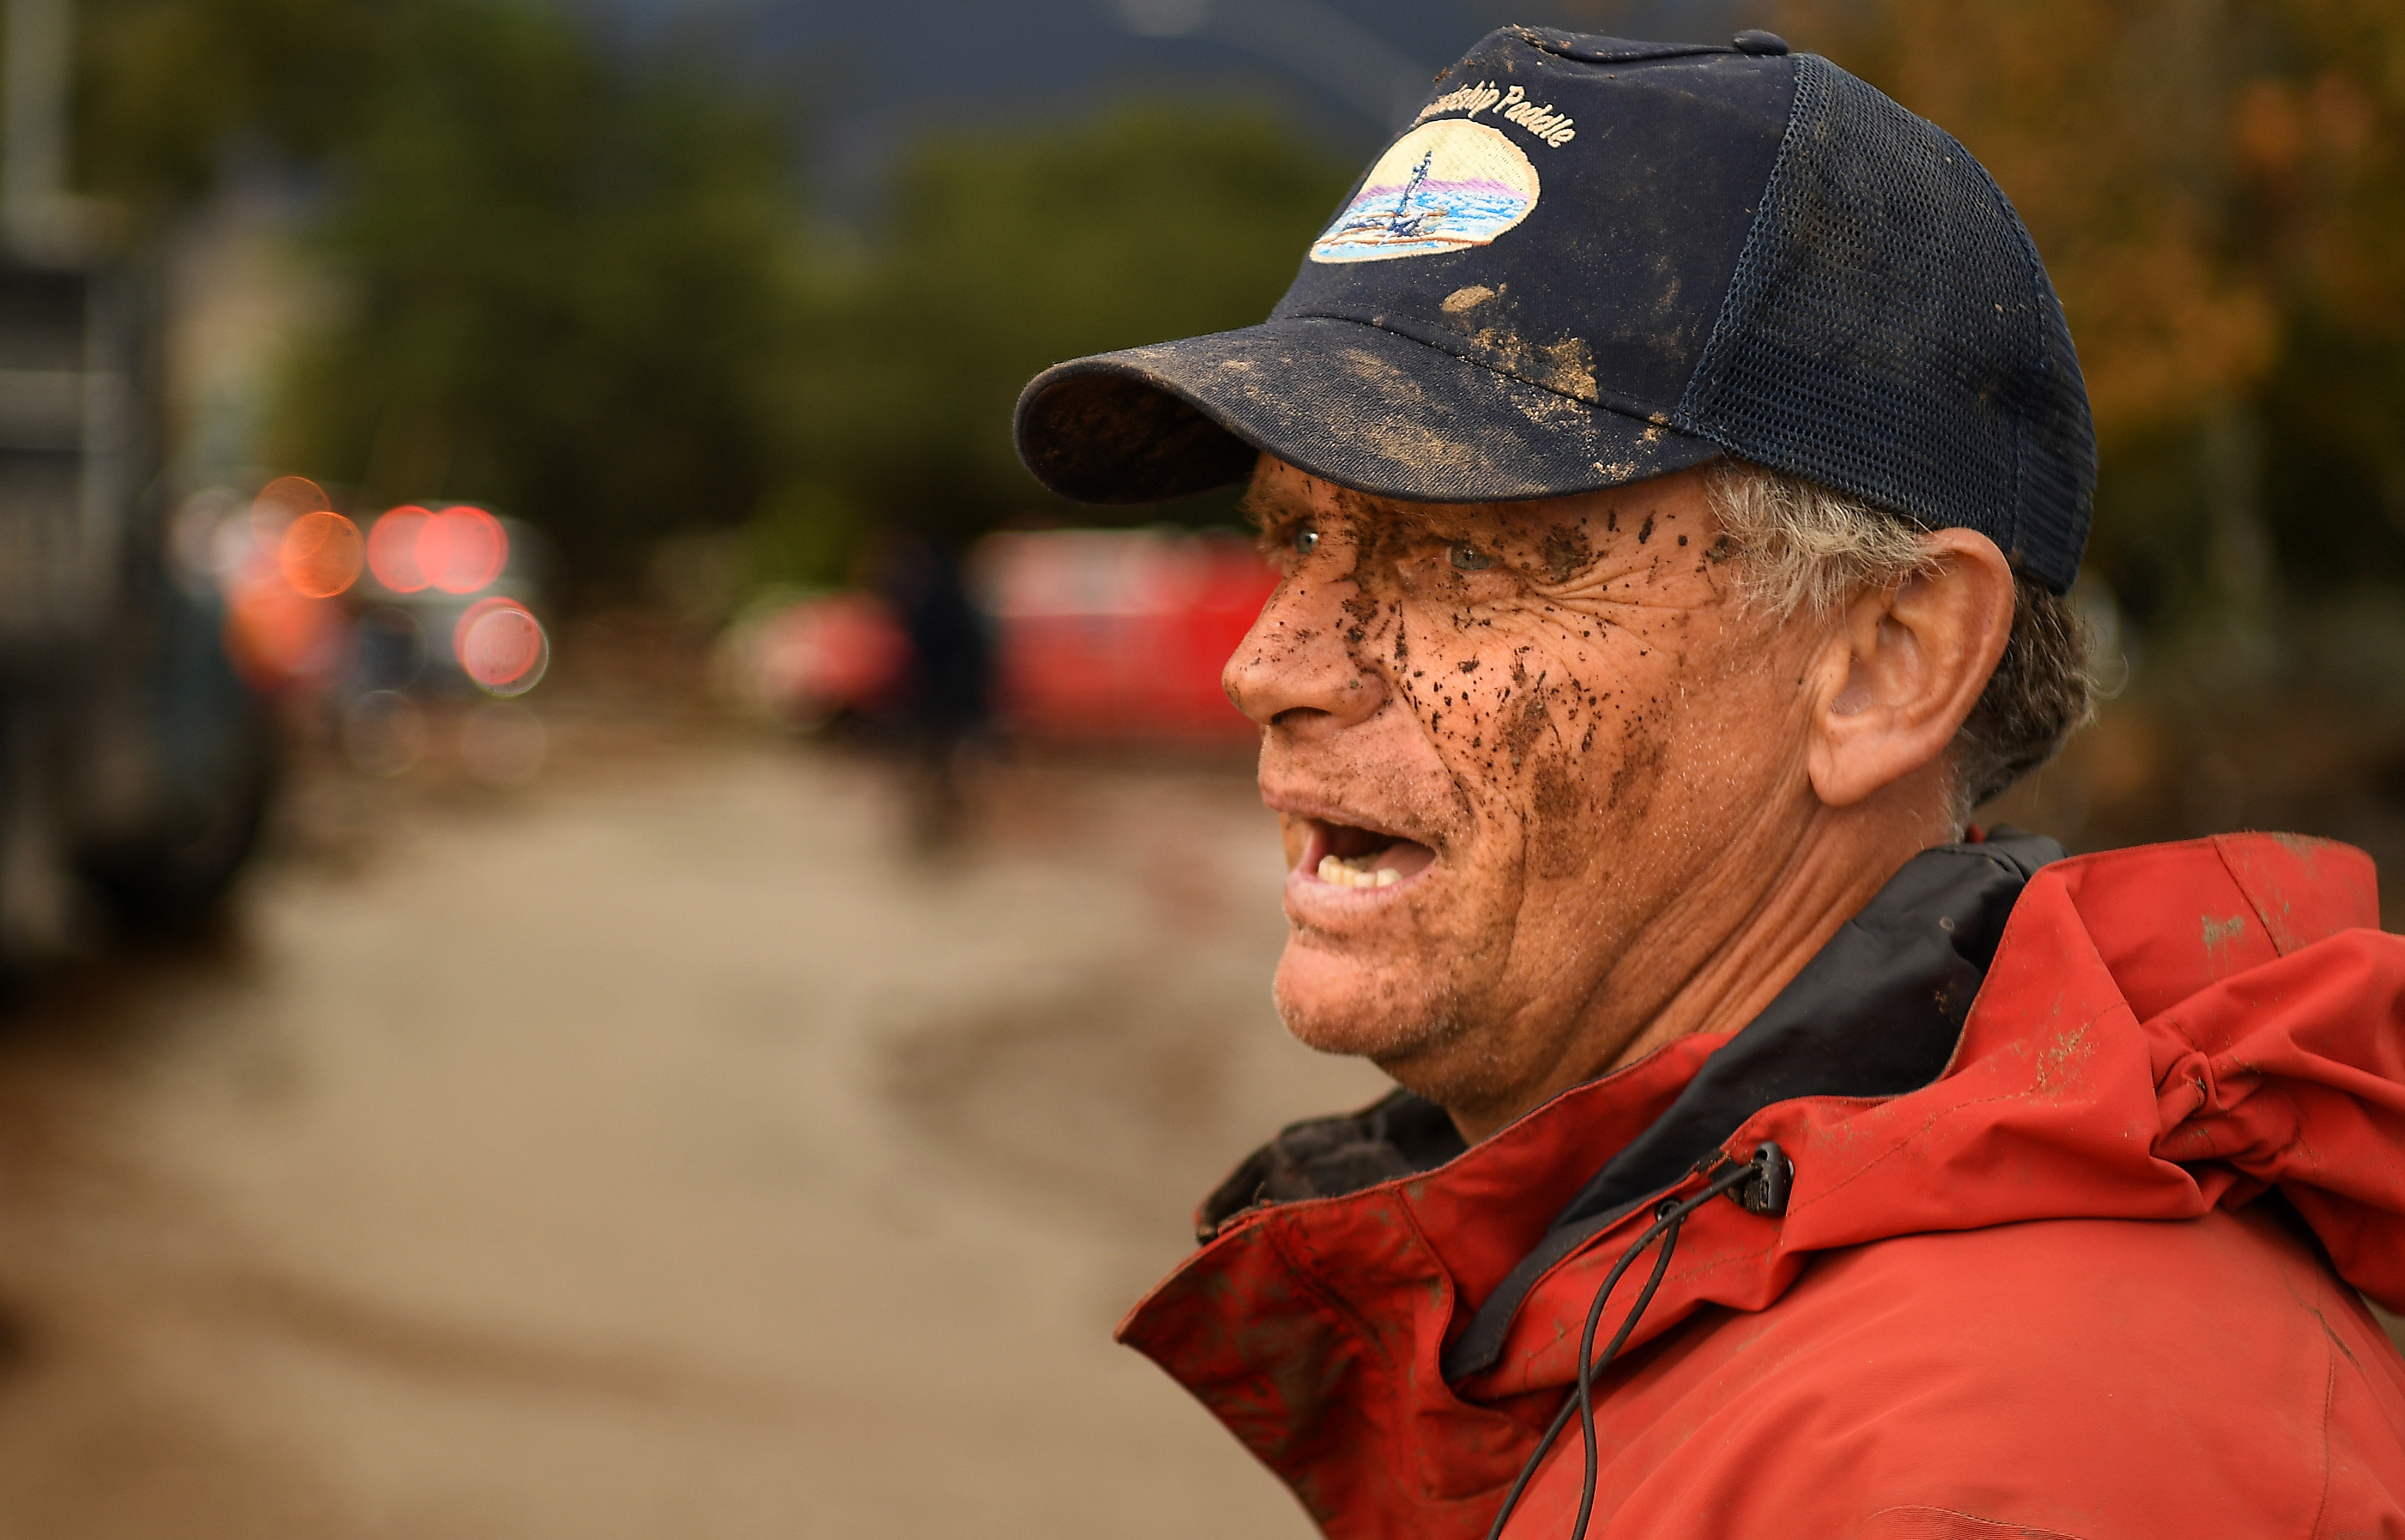 A muddy Mark Olson stands along Olive Mill Road in Montecito after trying to save his house after a major storm hit the burn area Tuesday January 9, 2018 in Montecito, California. (Wally Skalij&mdash;LA Times via Getty Images)